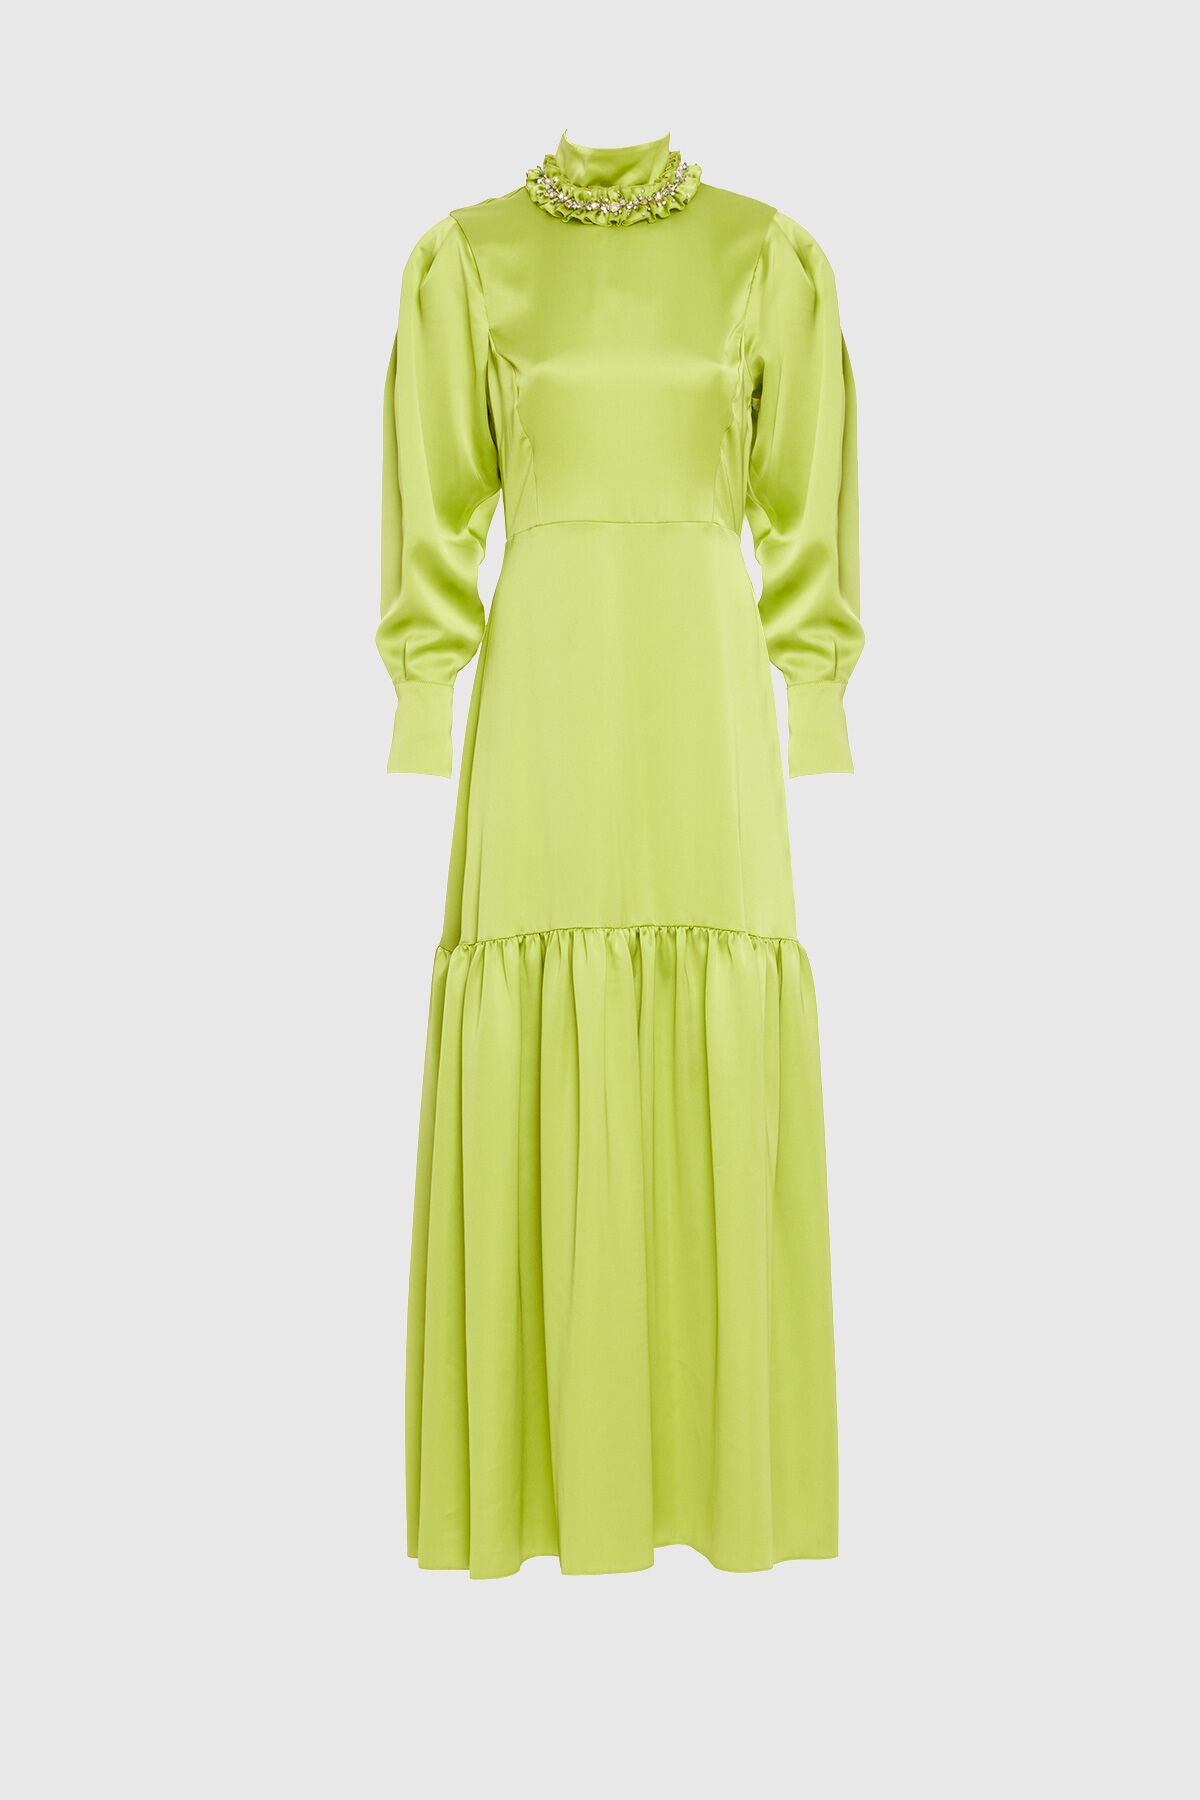  GIZIA - Embroidered Flowy Long Green Dress